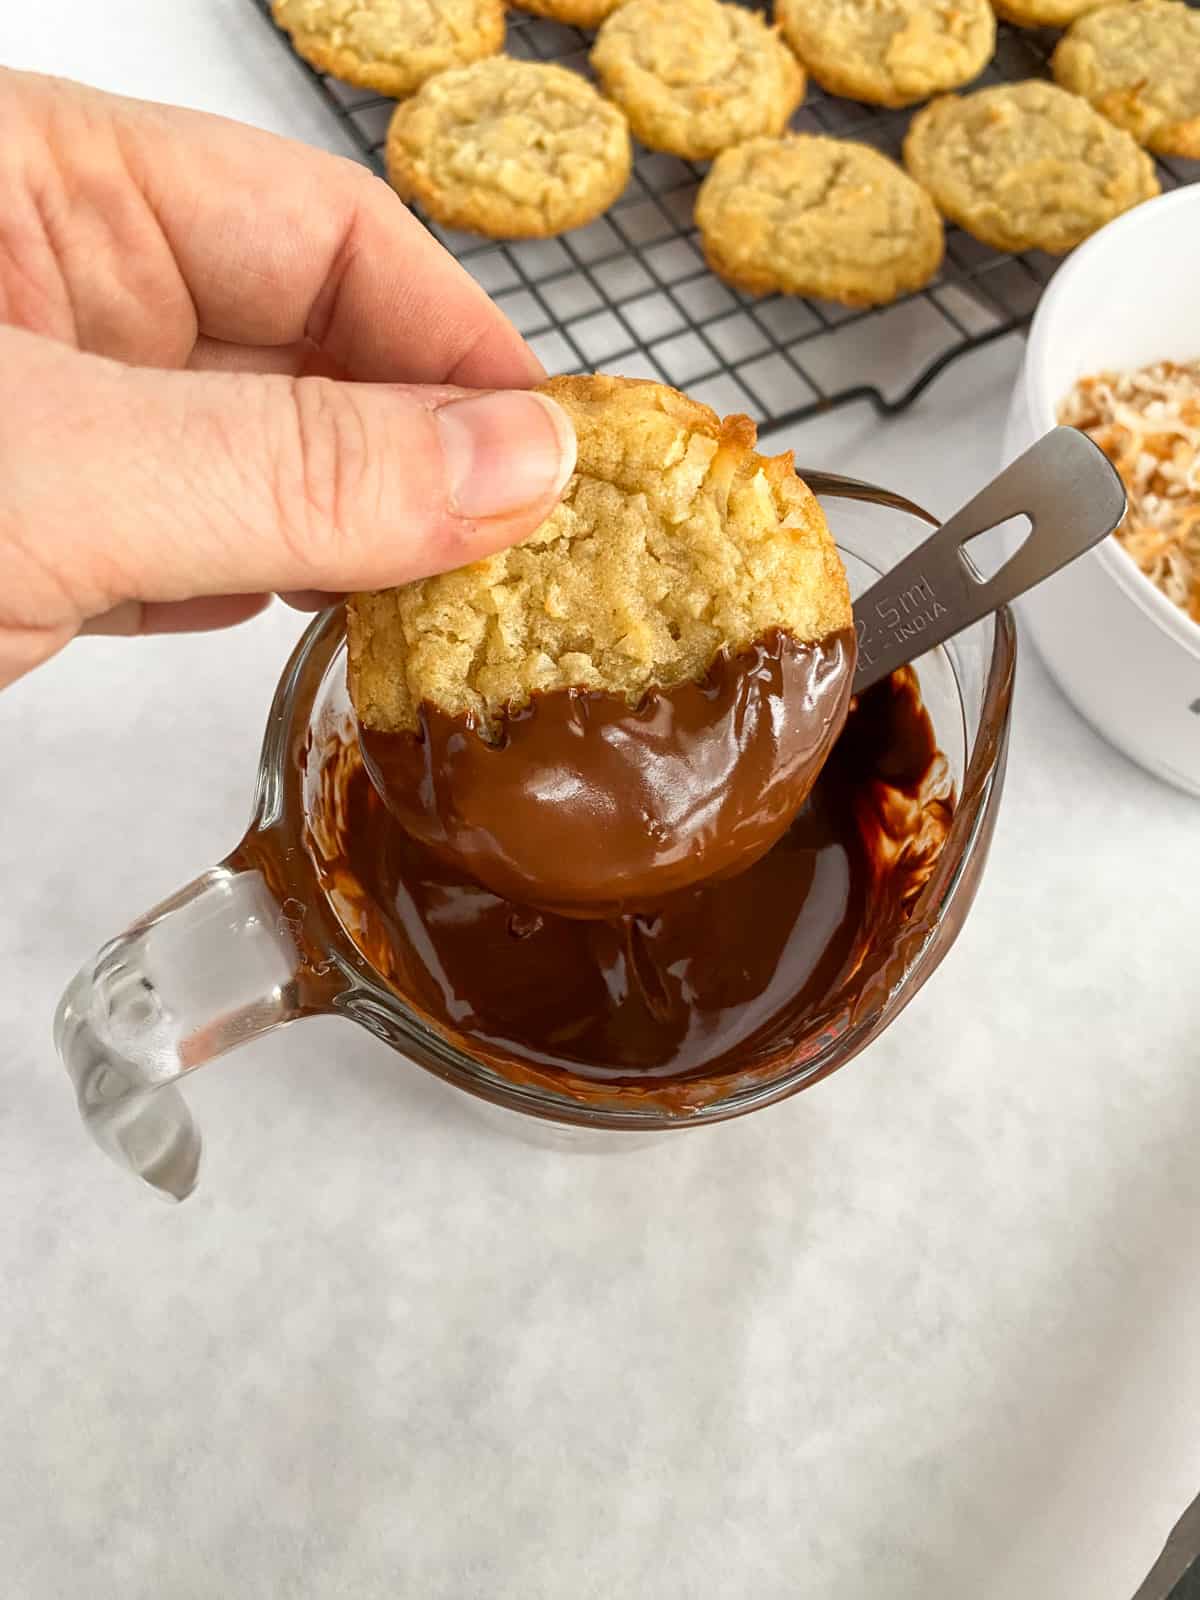 Dipping the cookies in melted chocolate.